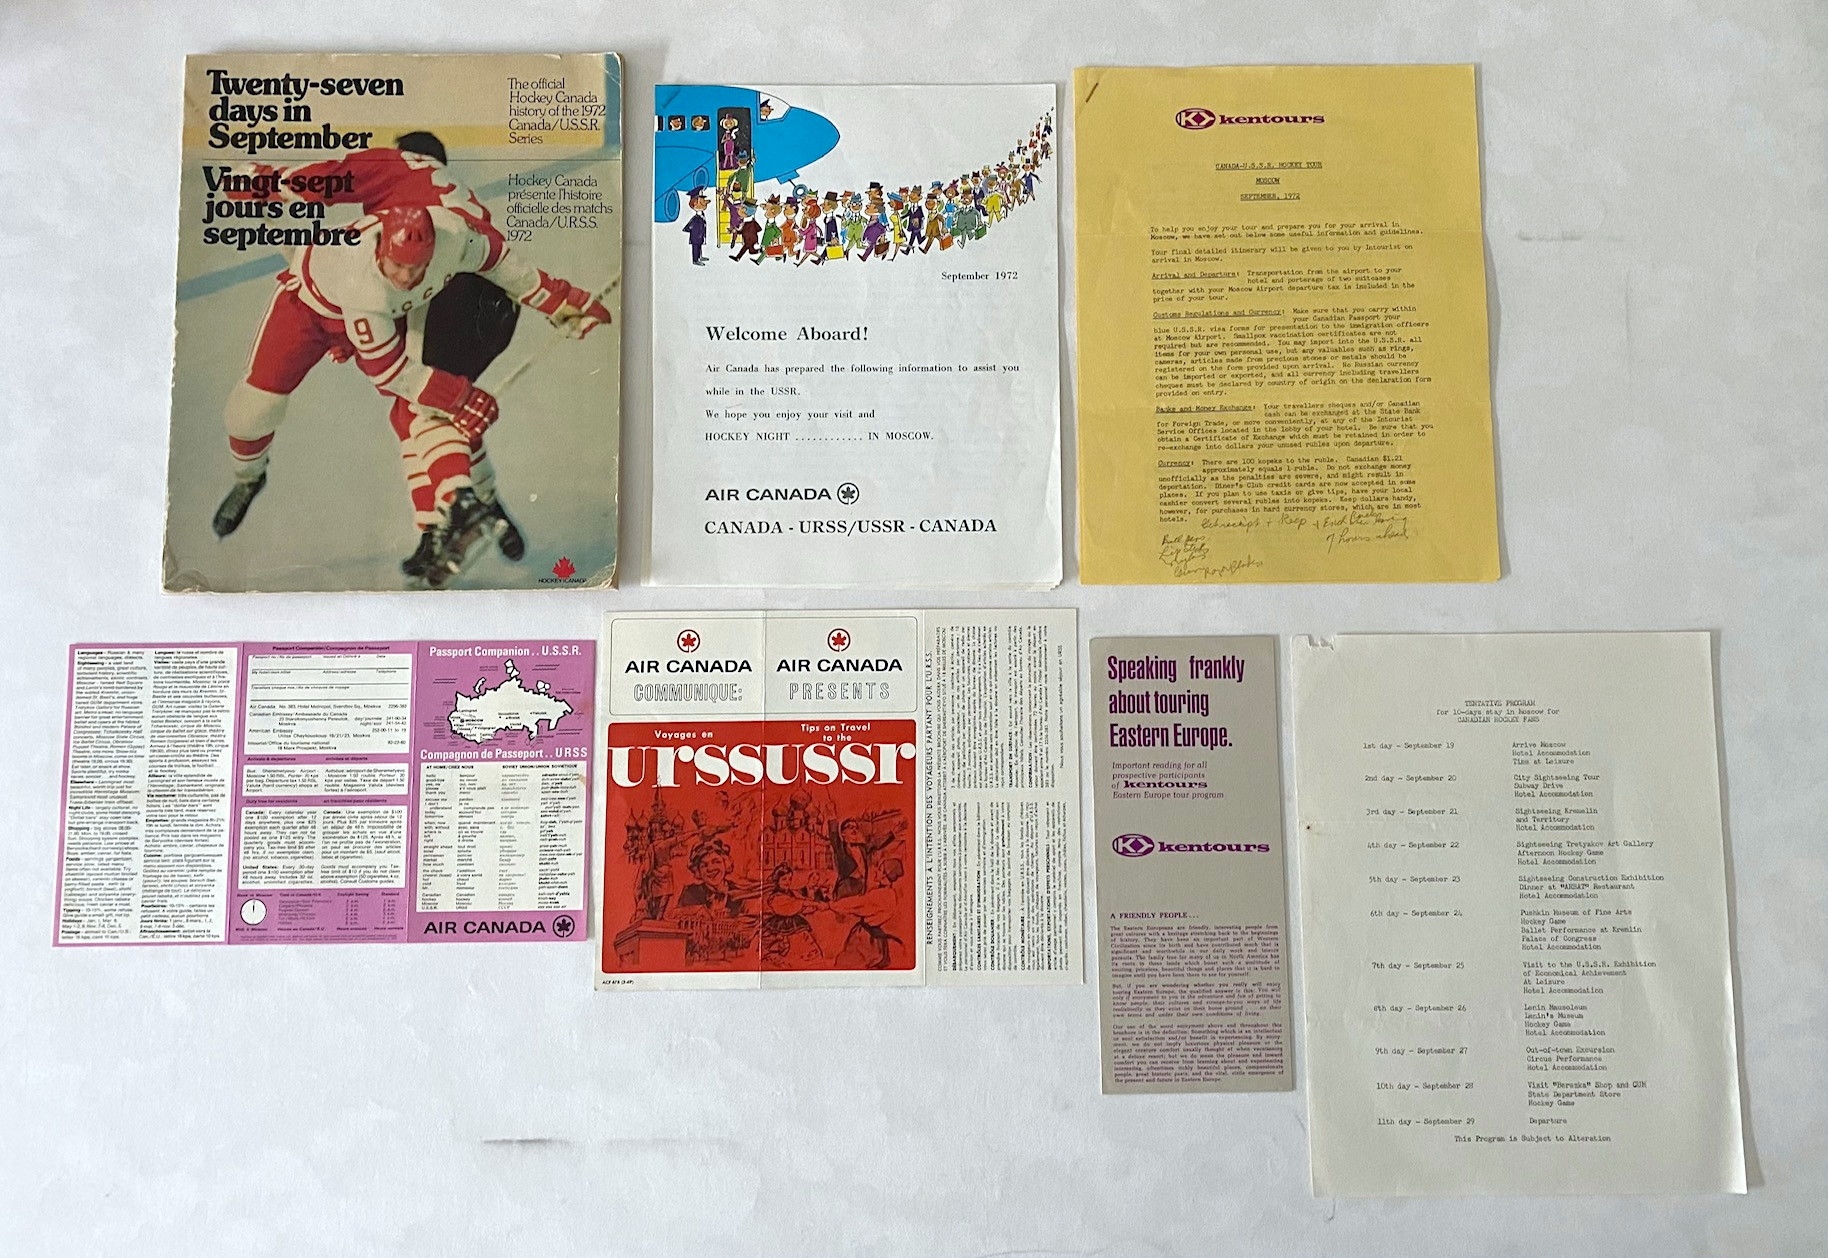 1972 Summit Series Original Travel Agency + Air Canada Tour Documents for Canadiens Going to Russia